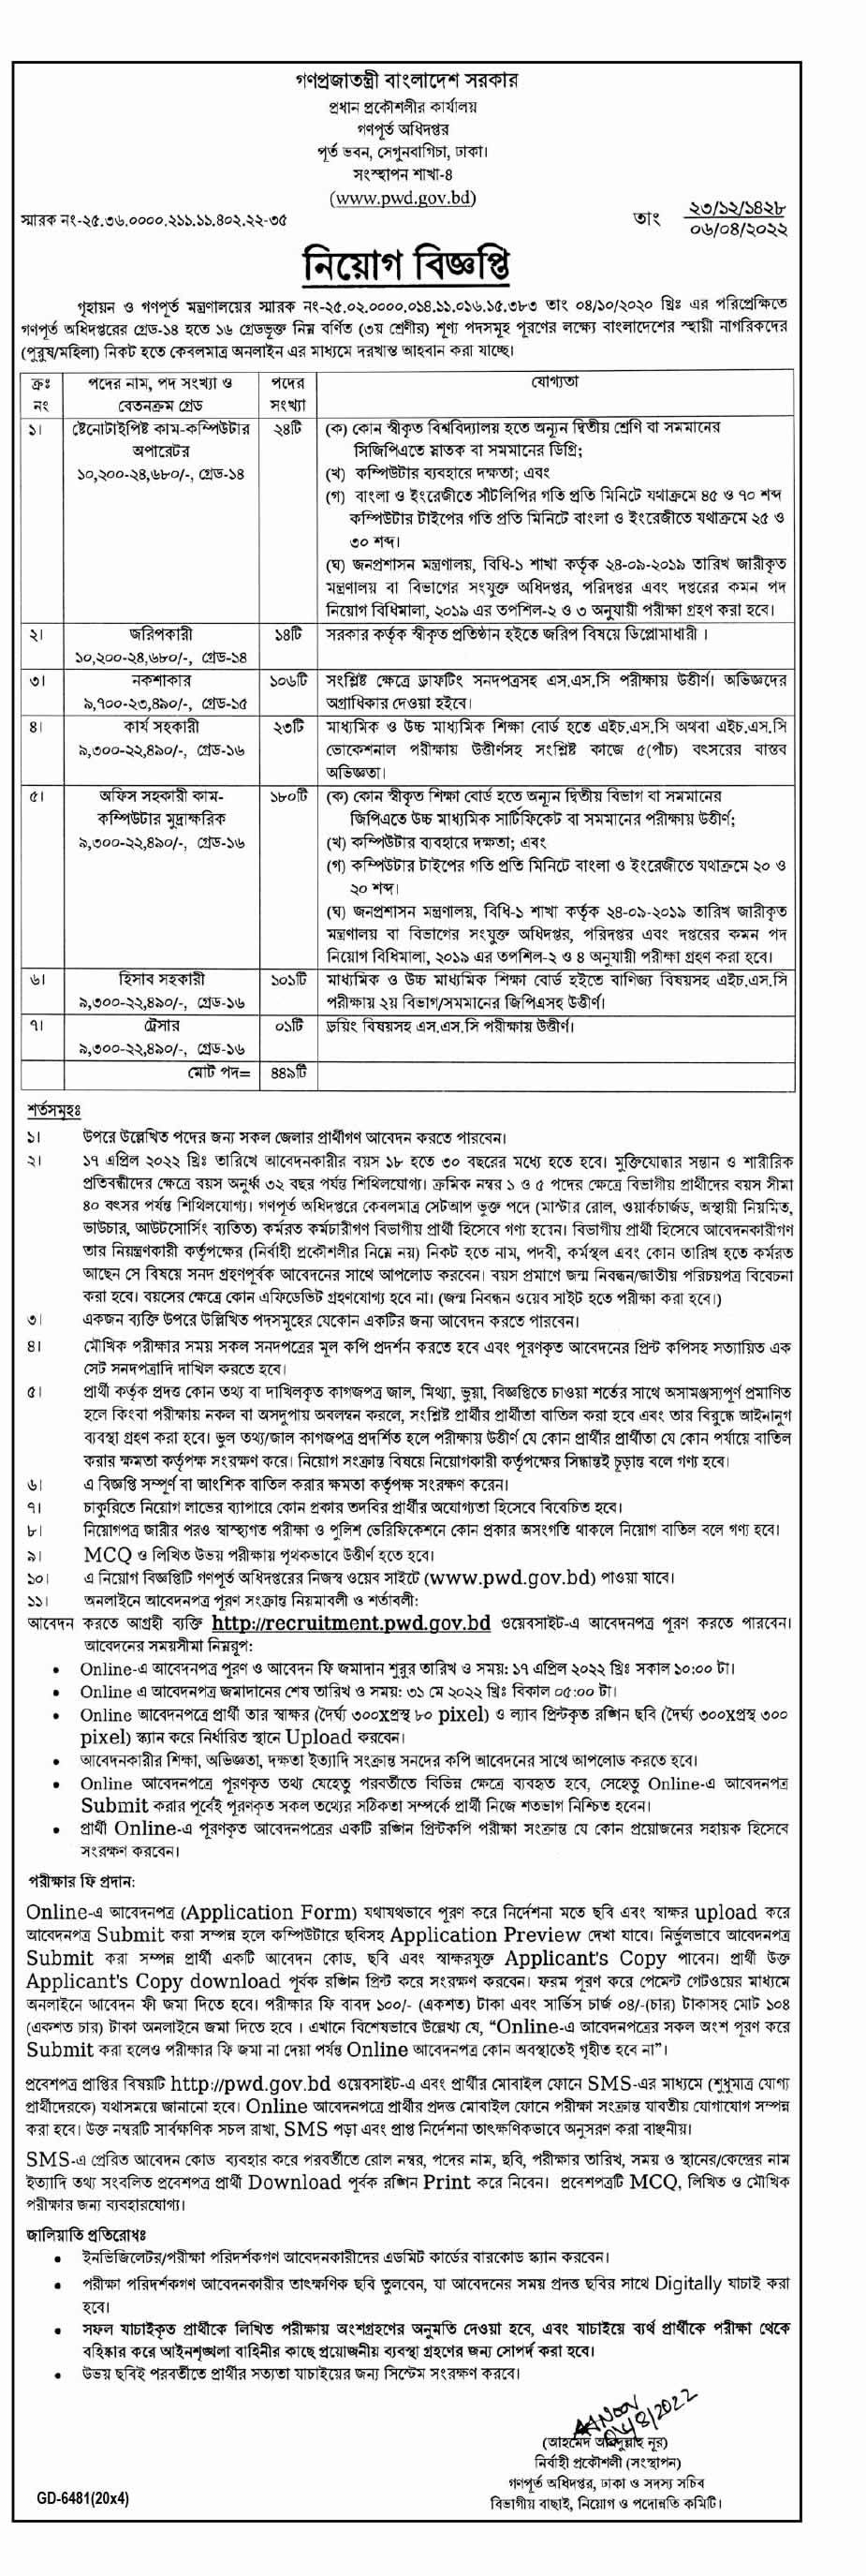 Ministry of Housing and Public Works mohpw Job Circular 2022